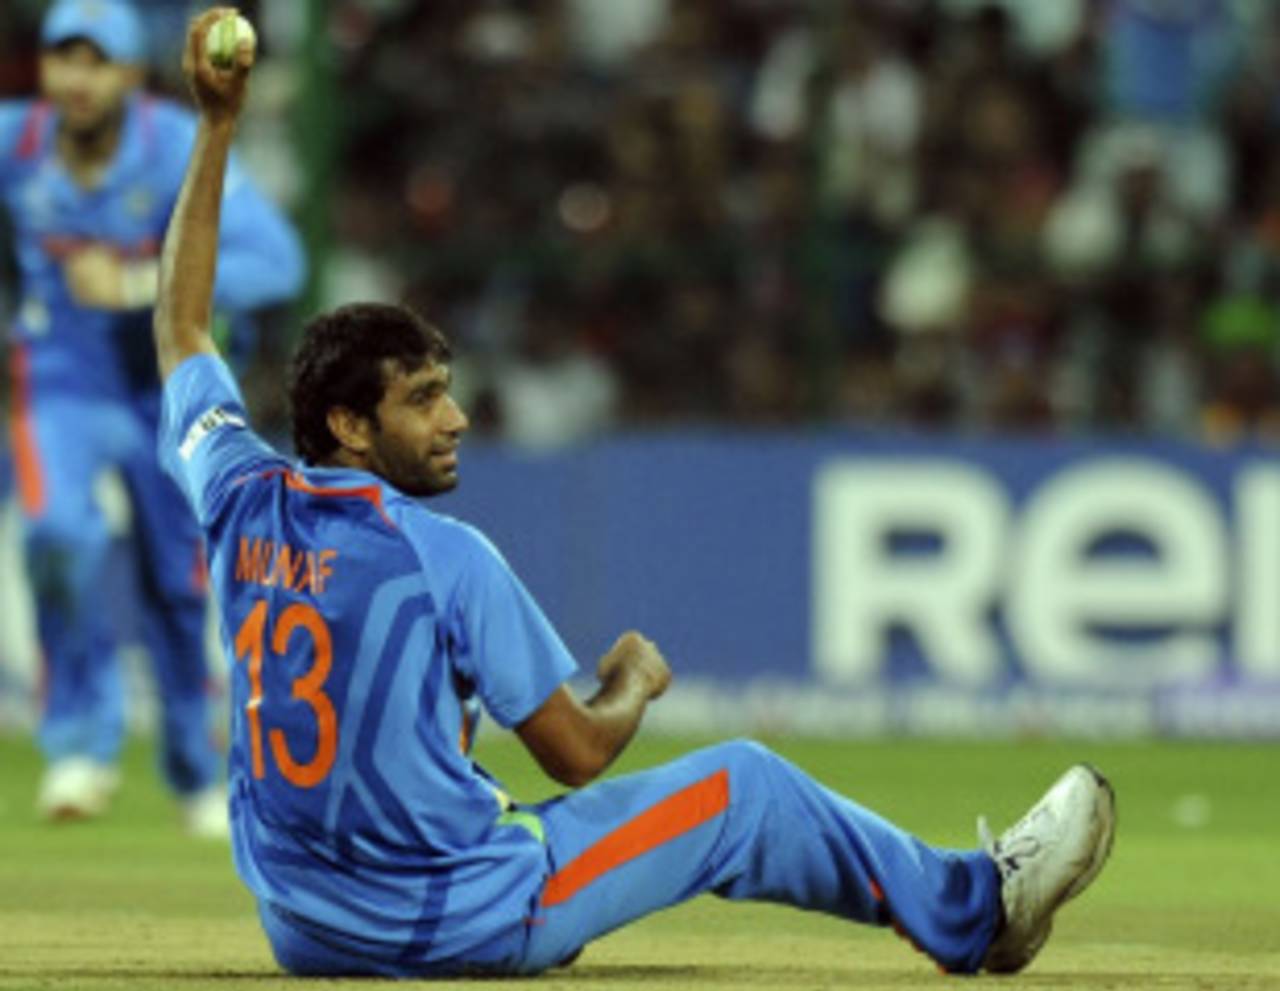 Munaf Patel took a clever return catch to dismiss Kevin Pietersen, World Cup, Group B, Bangalore, February 27, 2011